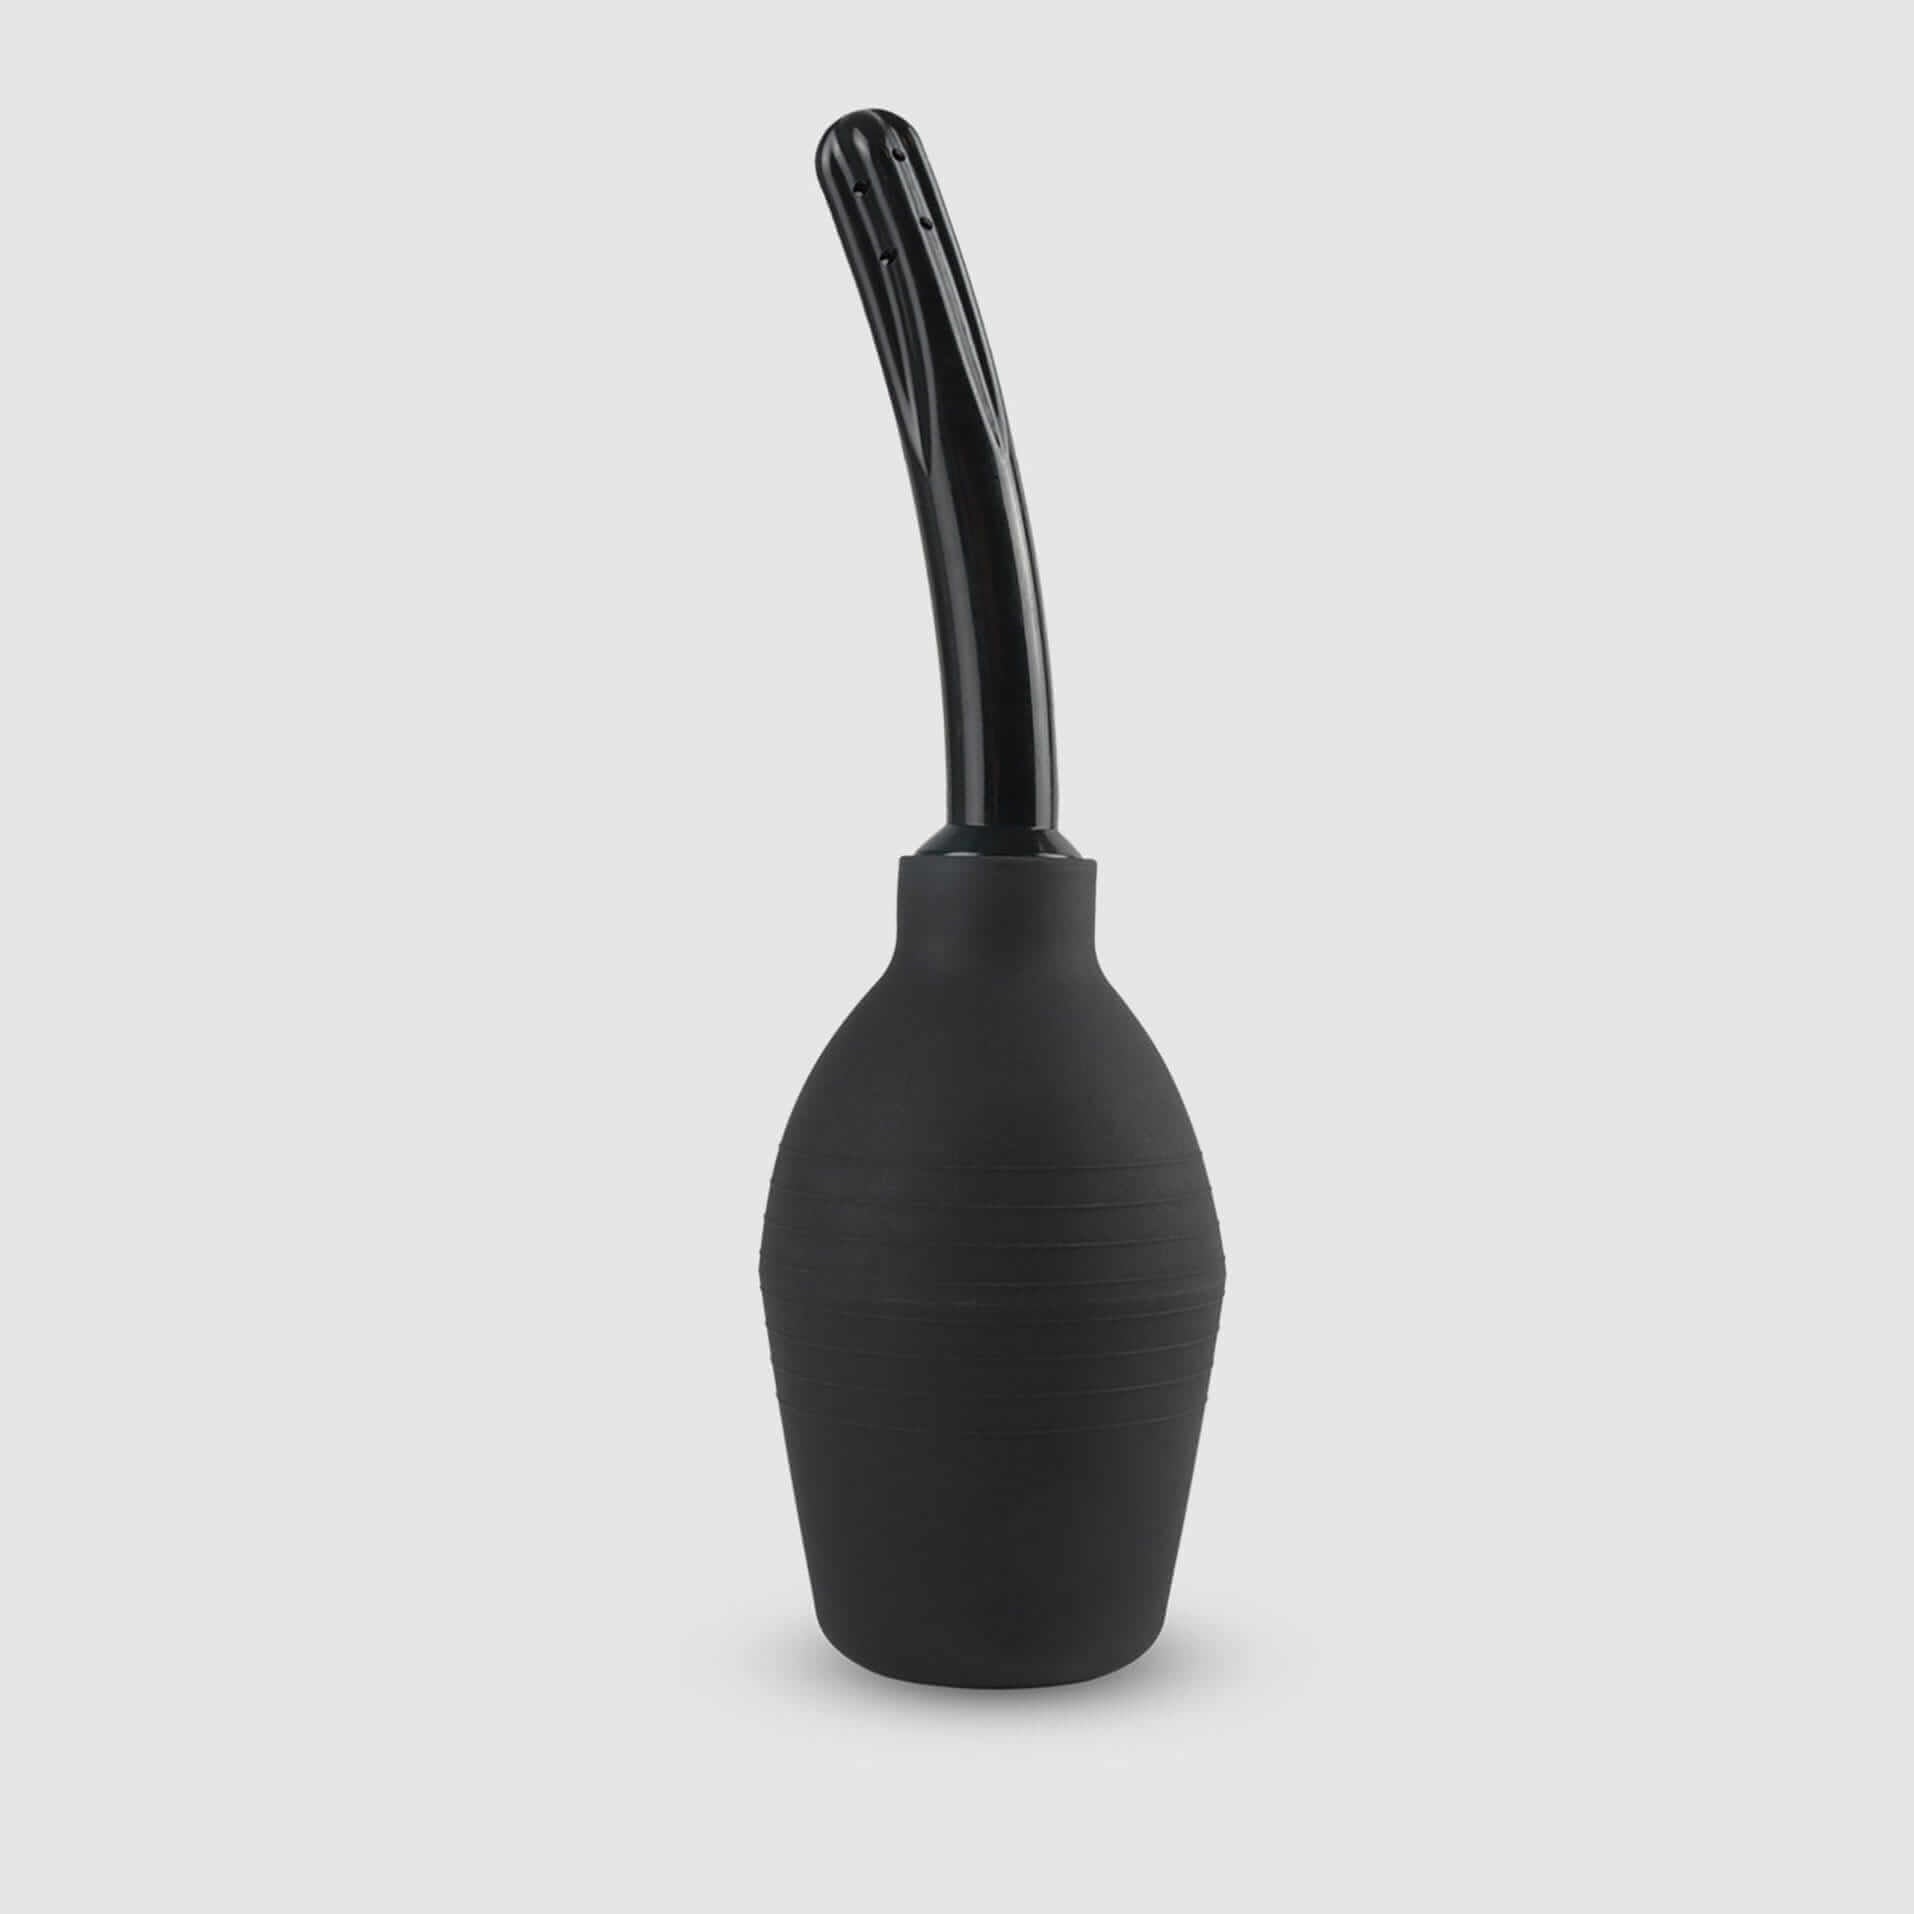 Curved Douche/Enema - Black, 300ml - Thorn & Feather Sex Toy Canada